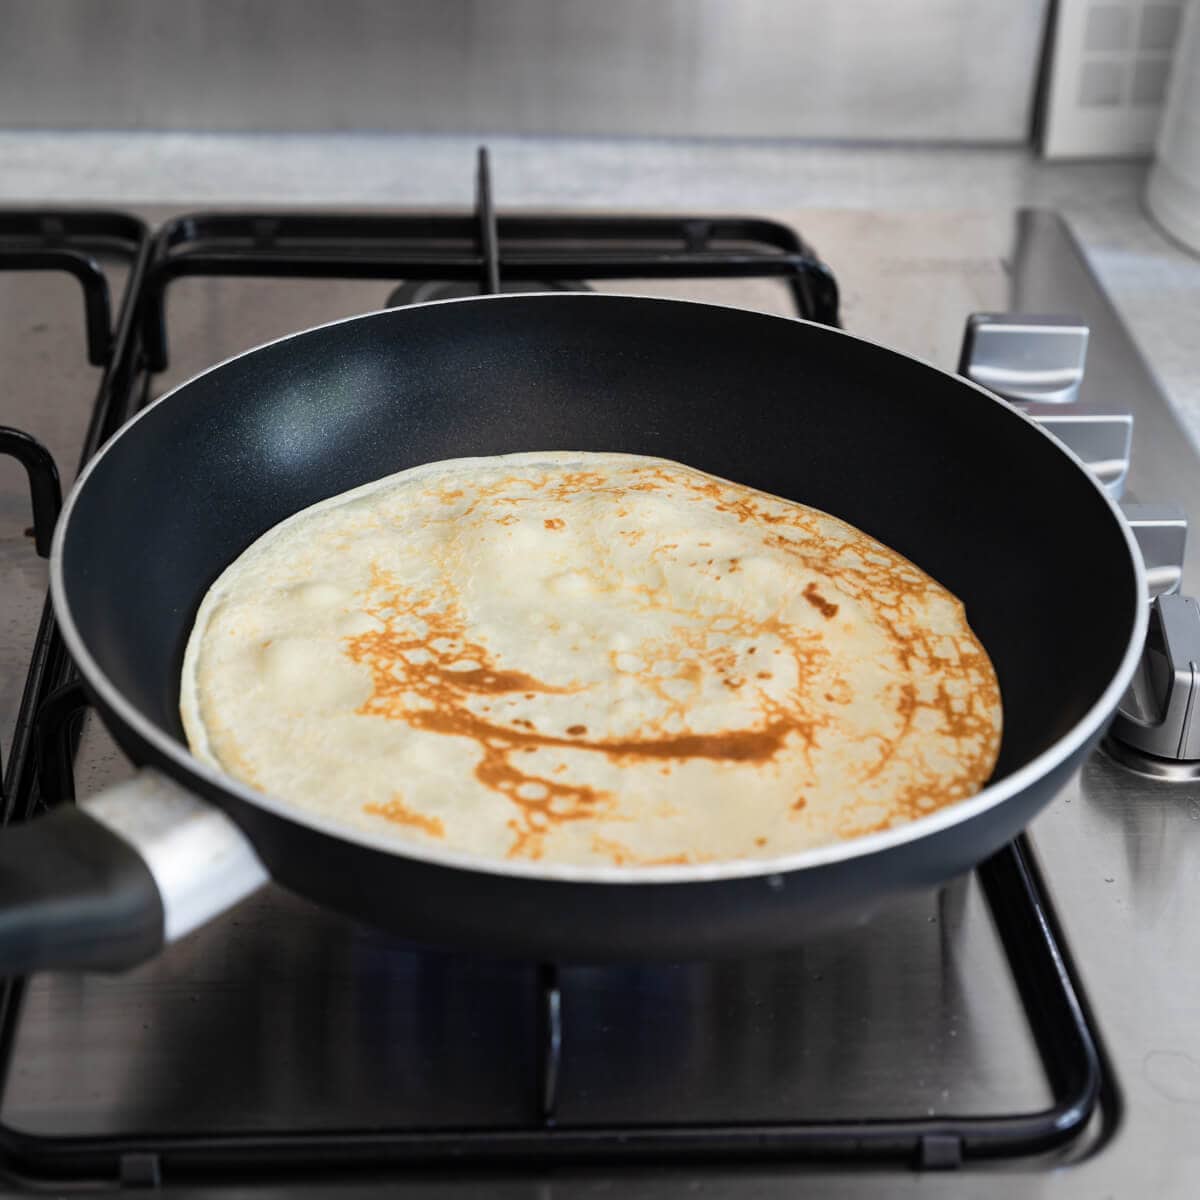 45 degree angle view at frying pan with crepe